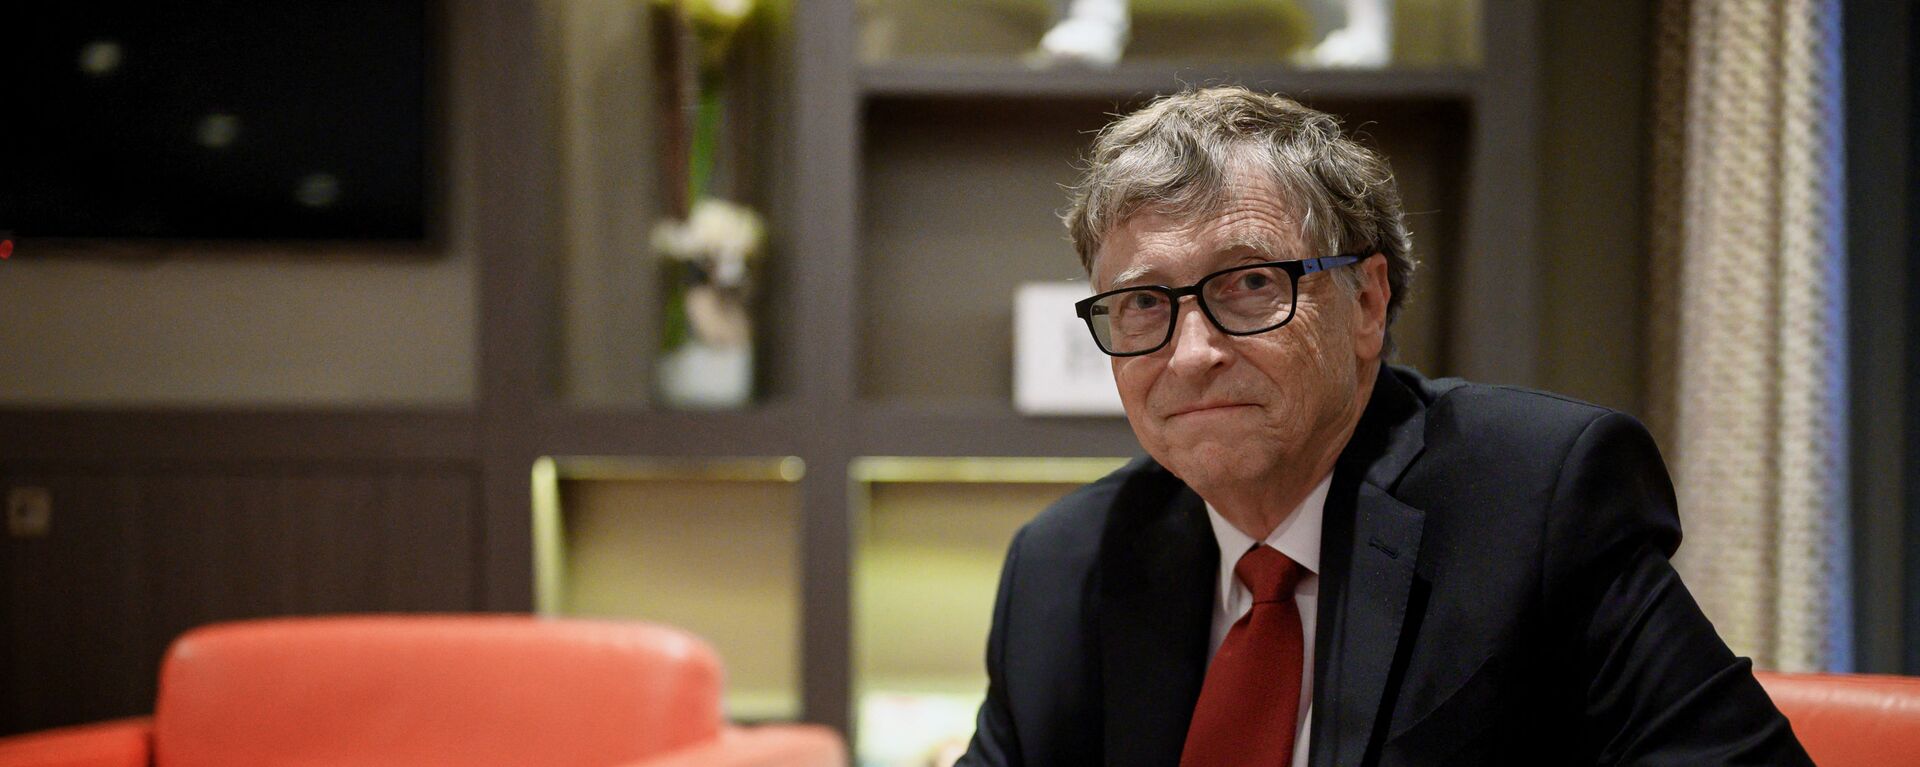 US Microsoft founder, Co-Chairman of the Bill & Melinda Gates Foundation, Bill Gates, poses for a picture on October 9, 2019, in Lyon, central eastern France, during the funding conference of Global Fund to Fight AIDS, Tuberculosis and Malaria.  - Sputnik International, 1920, 14.06.2023